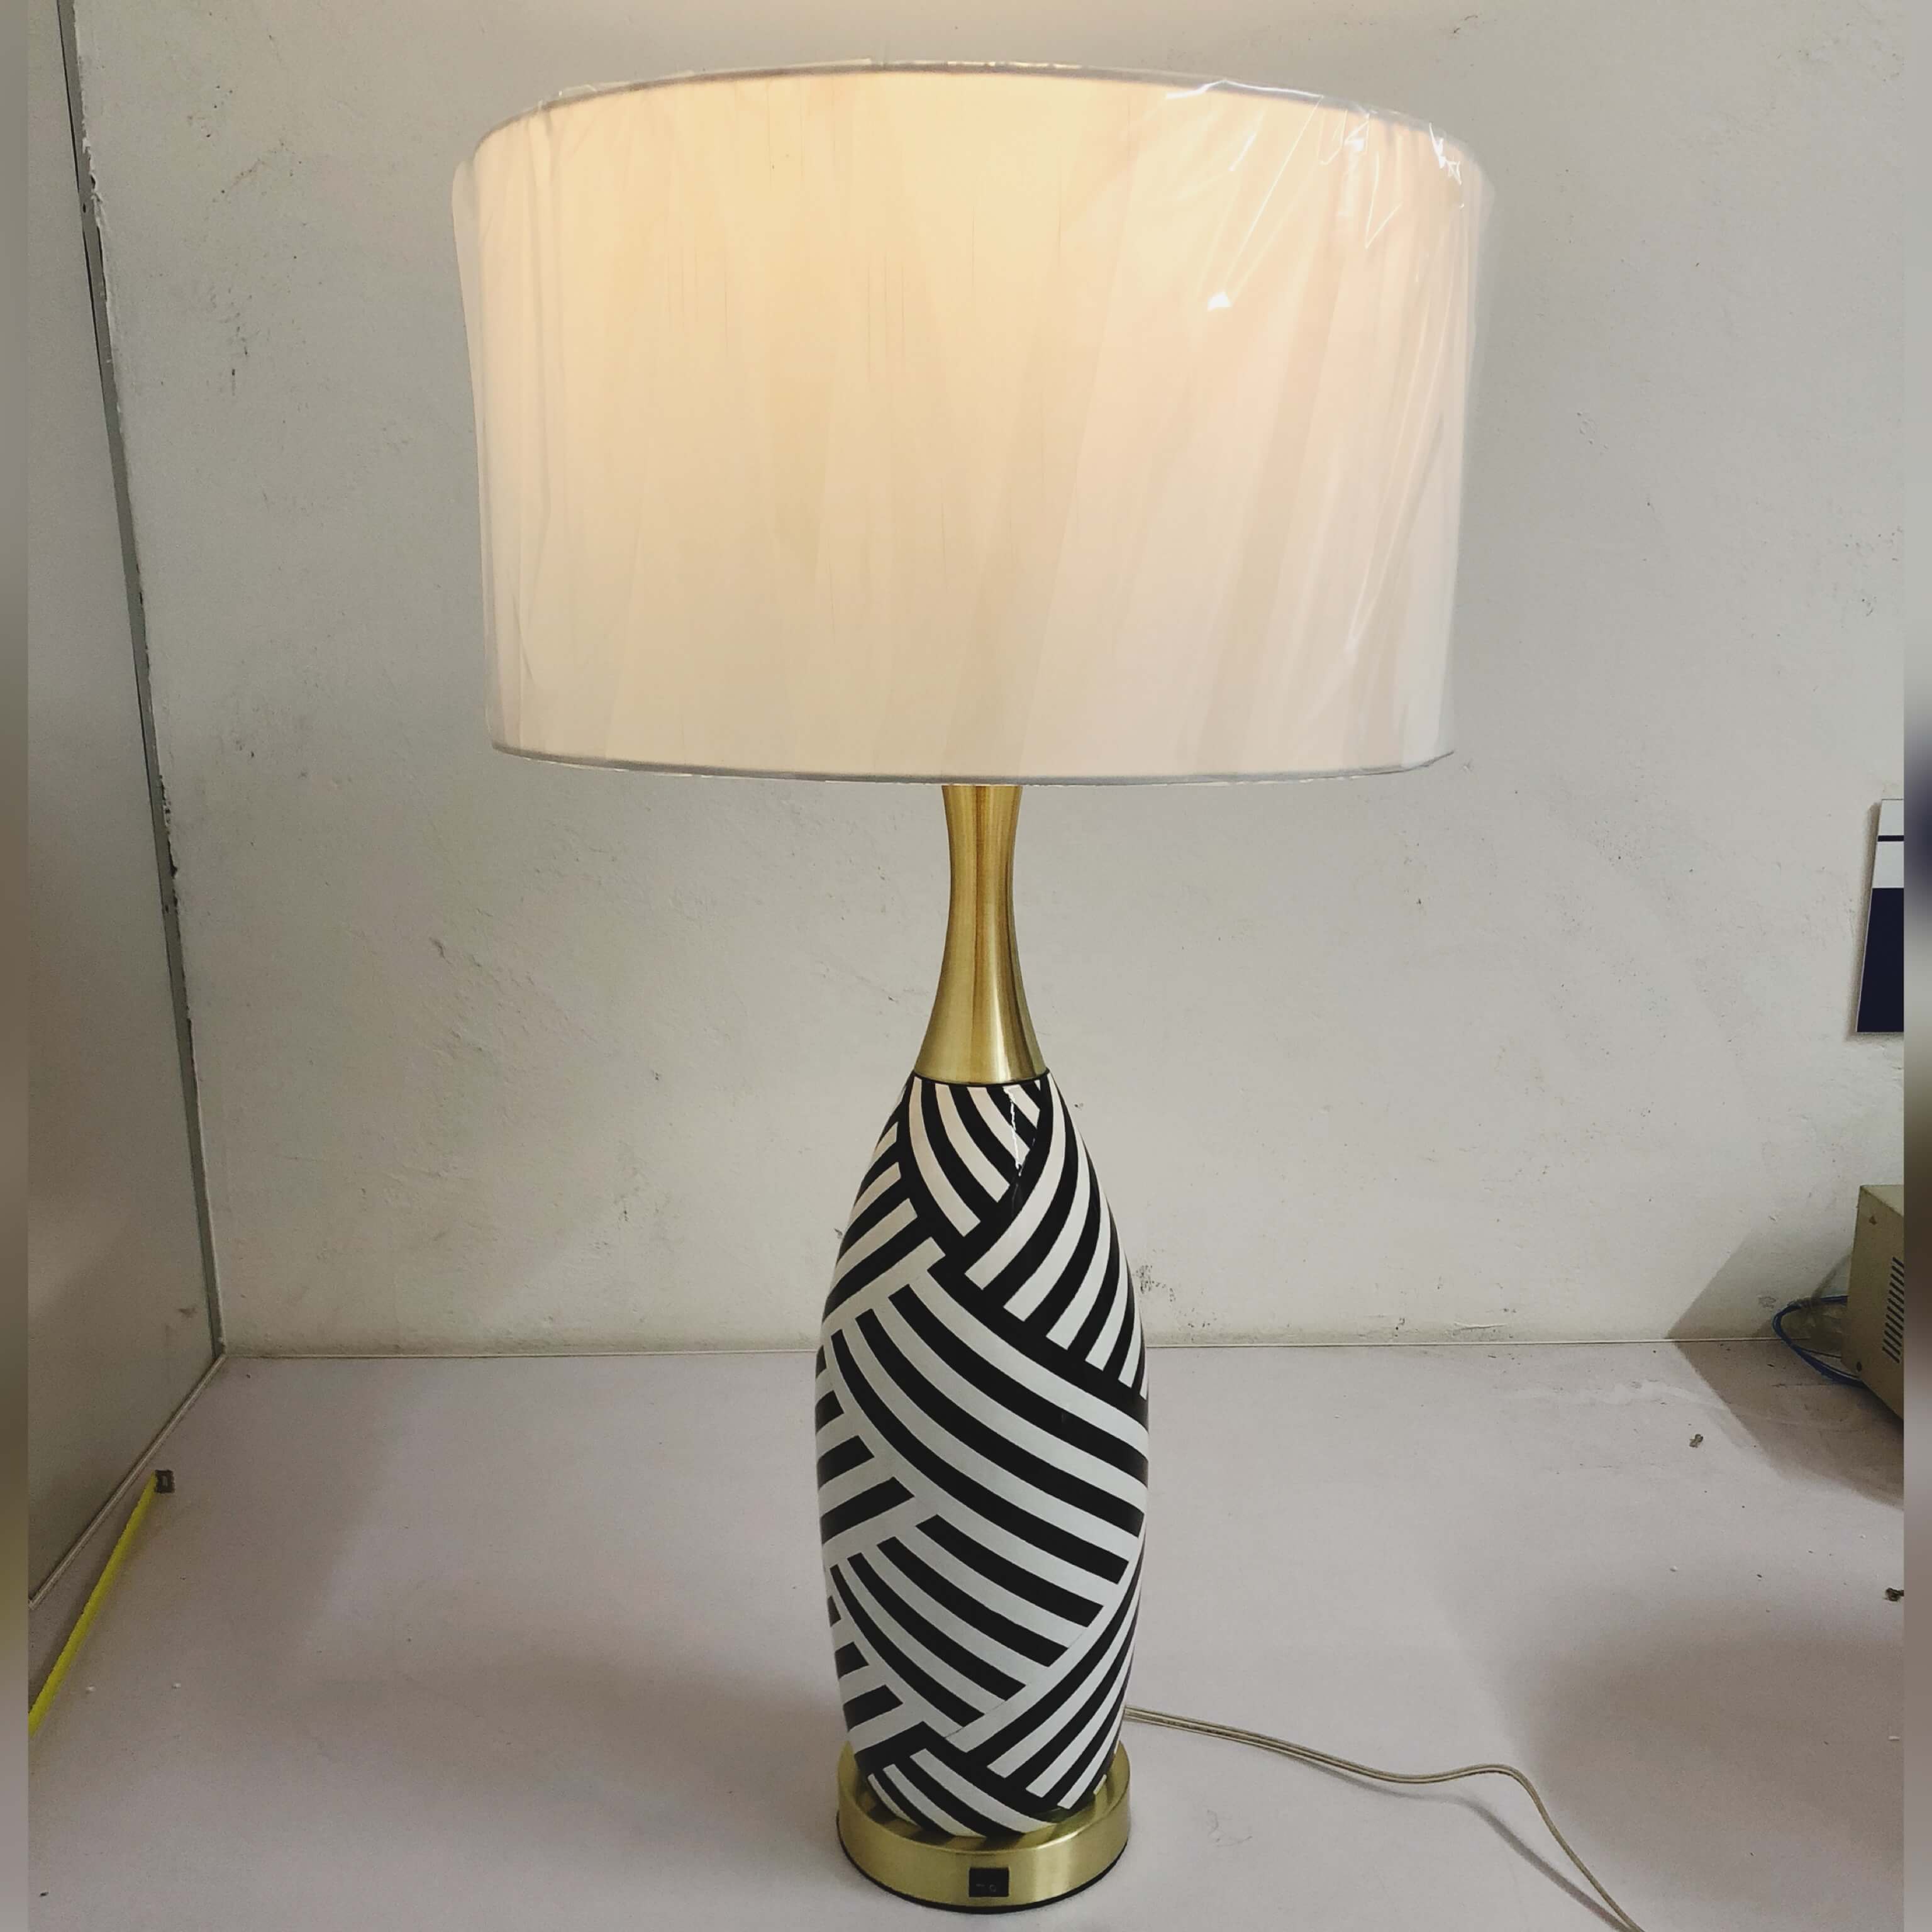 https://www.hotel-lamps.com/resources/assets/images/product_images/DECORATIVE-CUSTOM-CERAMIC-BODY-TABLE-LAMP-FOR (2).jpg